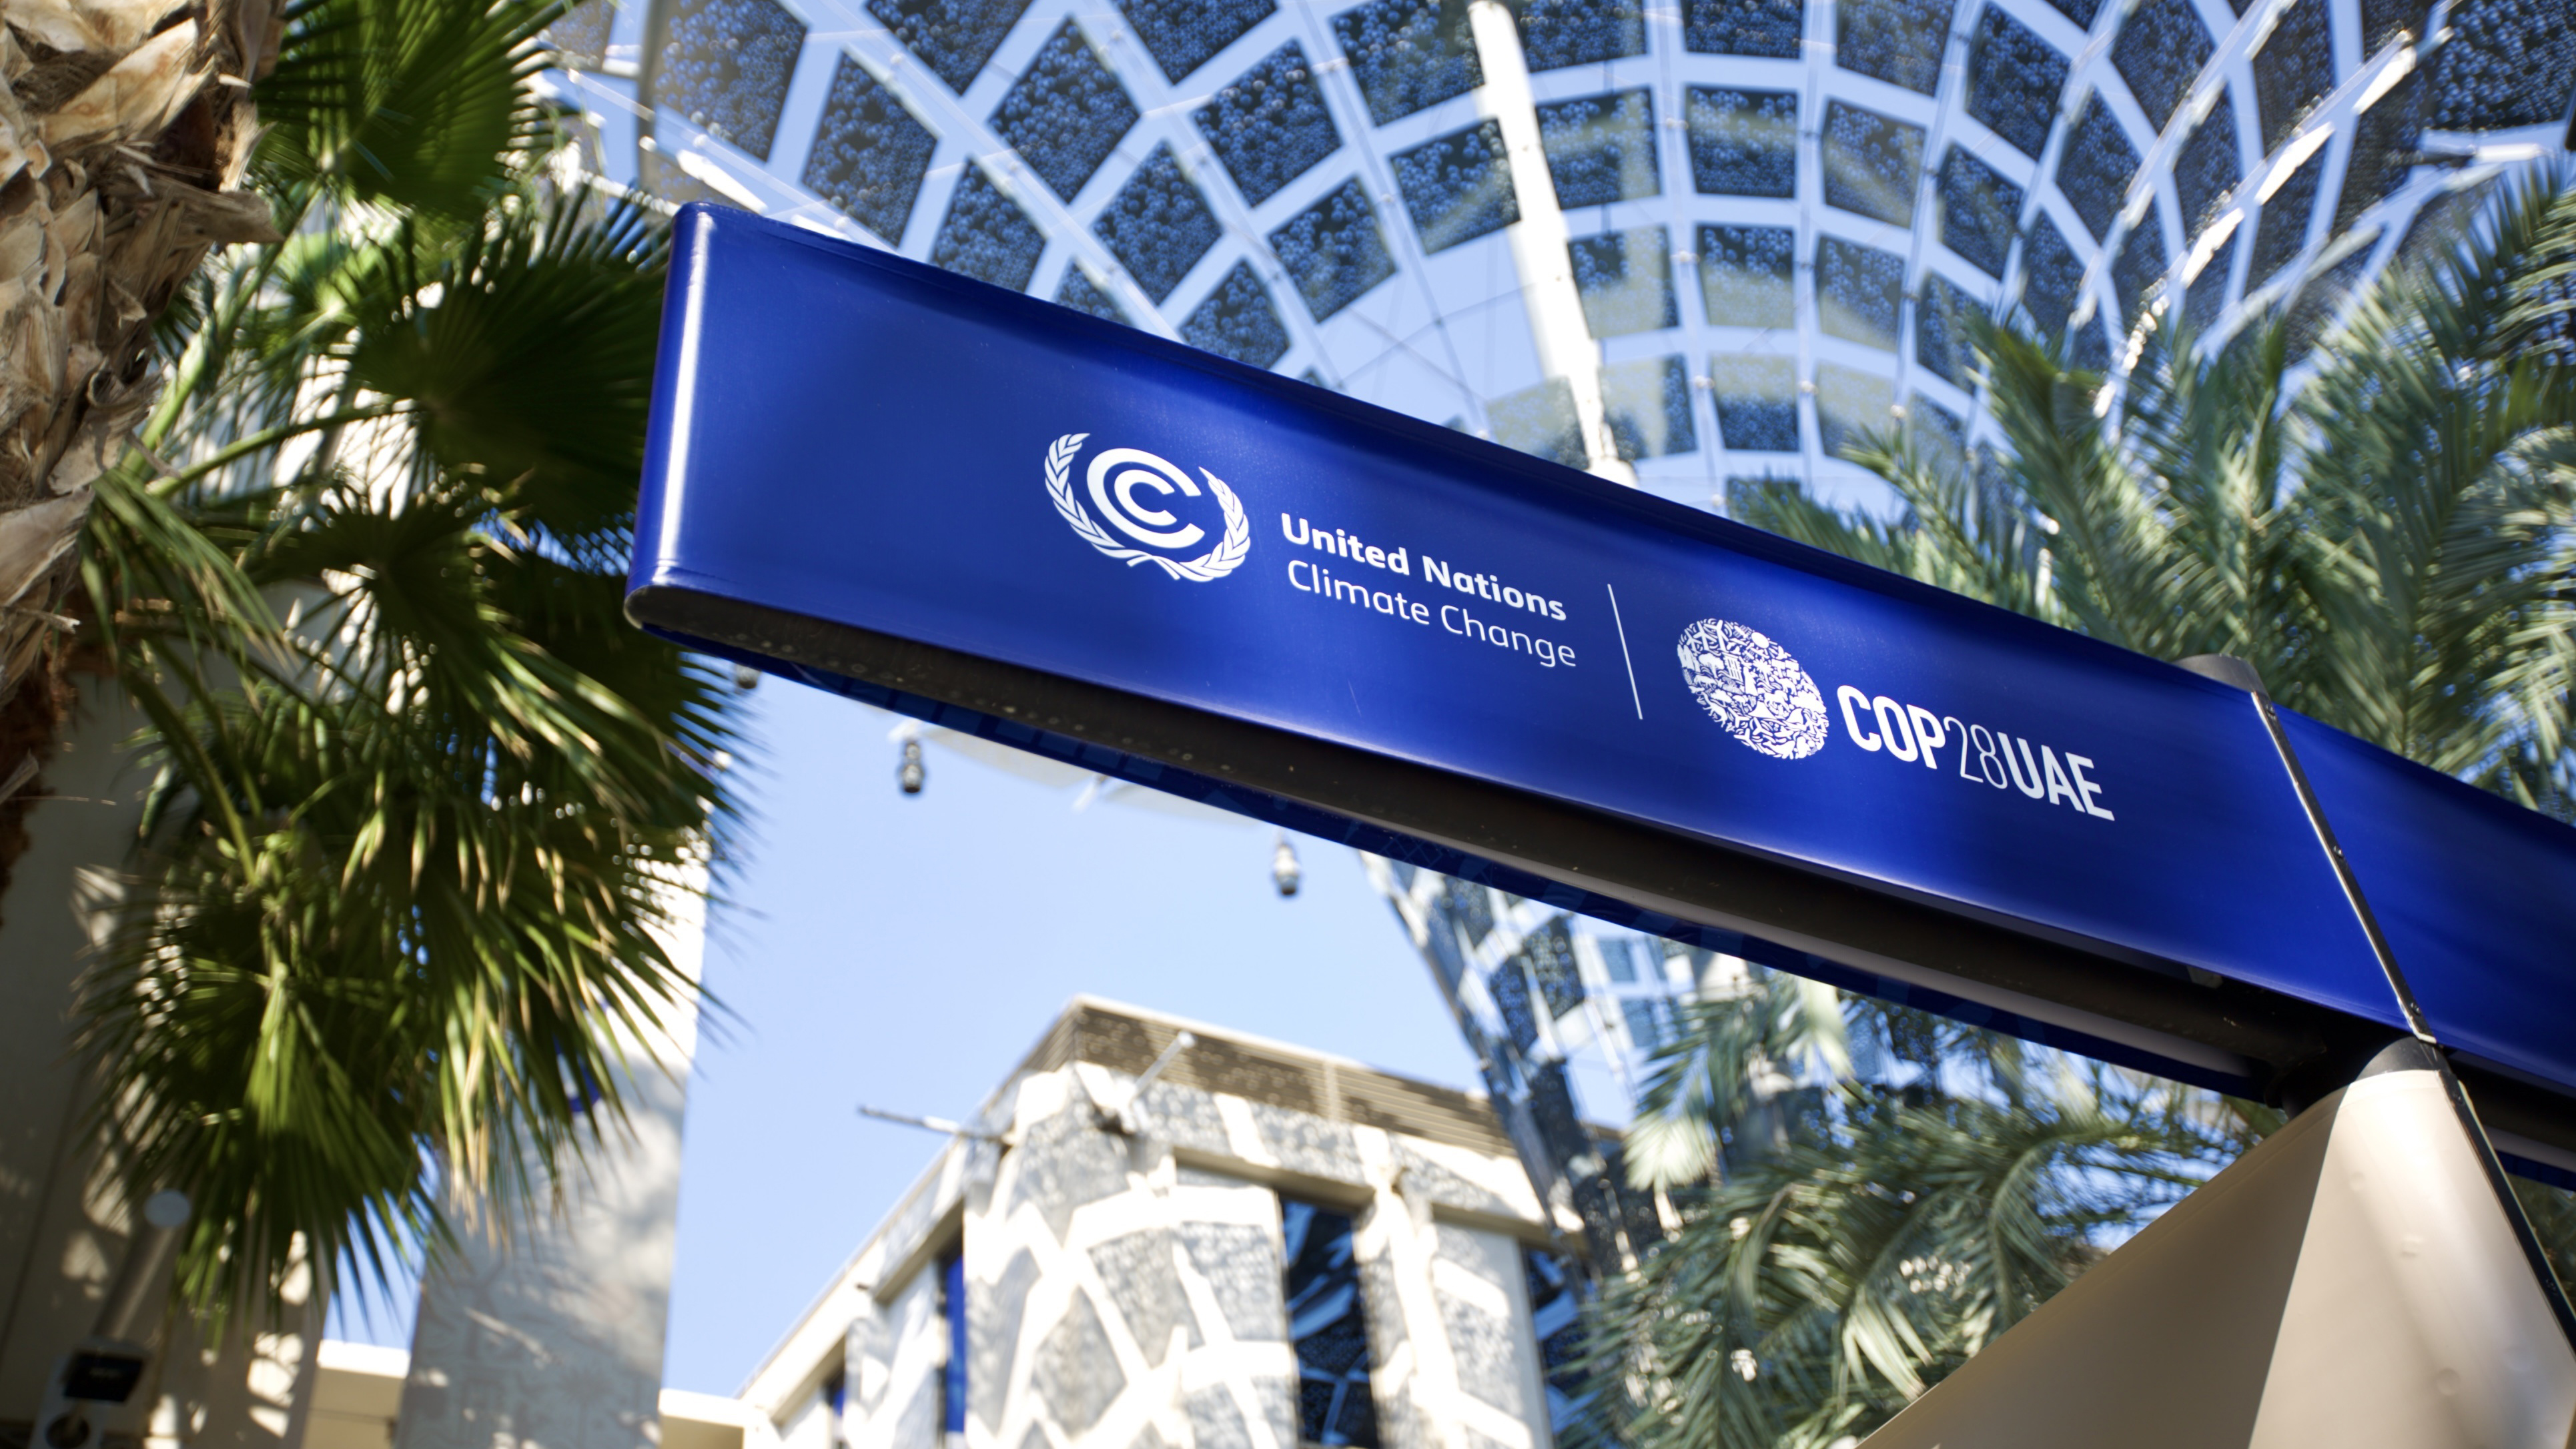 A blue banner with white United Nations logos and writing stretches above an outdoor pedestrian area. Palm trees and parts of buildings are visible around and behind the banner.